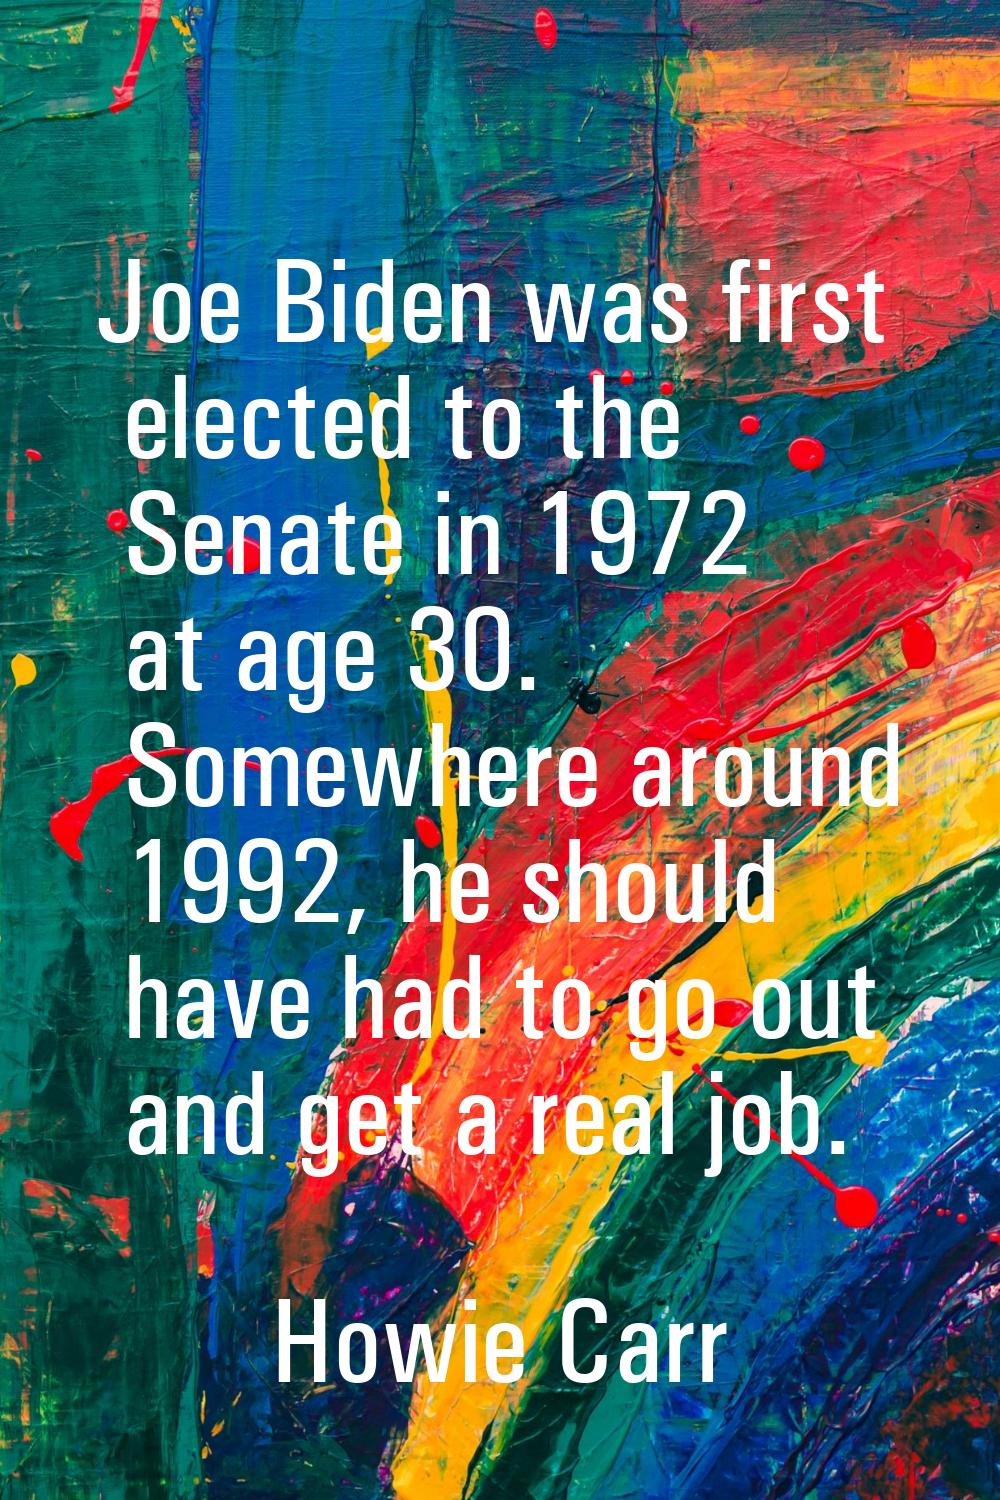 Joe Biden was first elected to the Senate in 1972 at age 30. Somewhere around 1992, he should have 